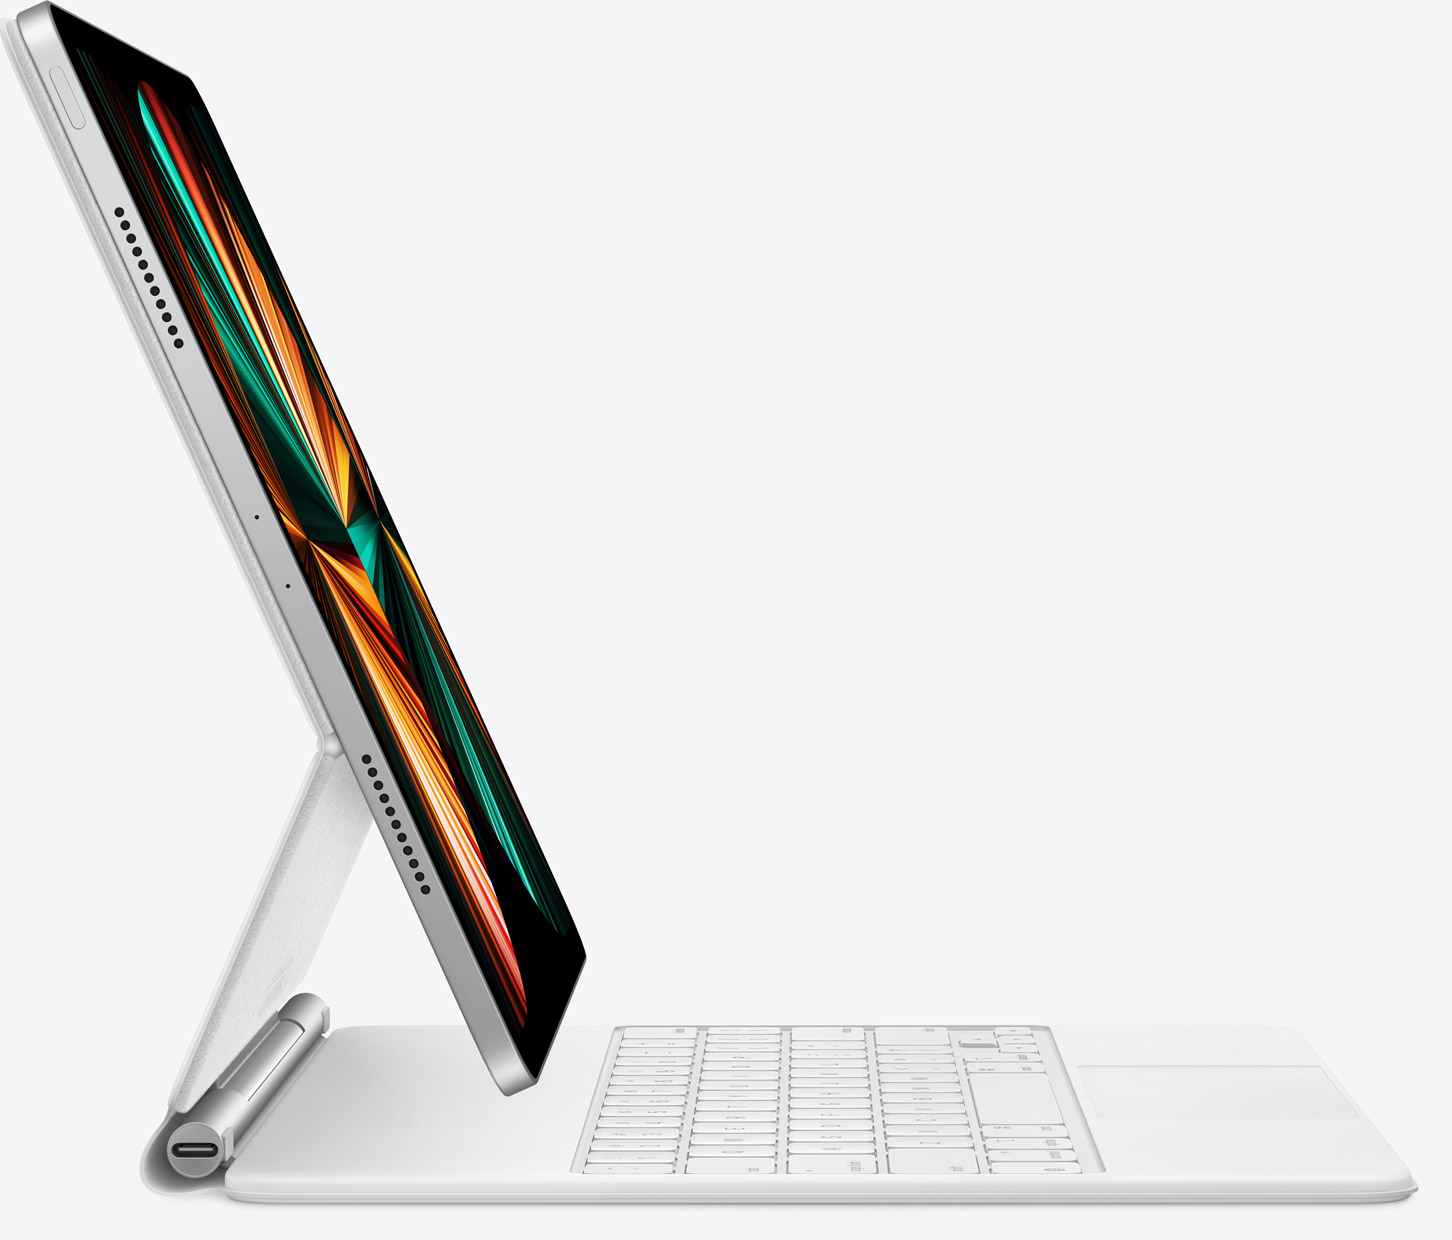 Apple Announces New iMacs, iPads, AirTags, and More - The Mac Security Blog